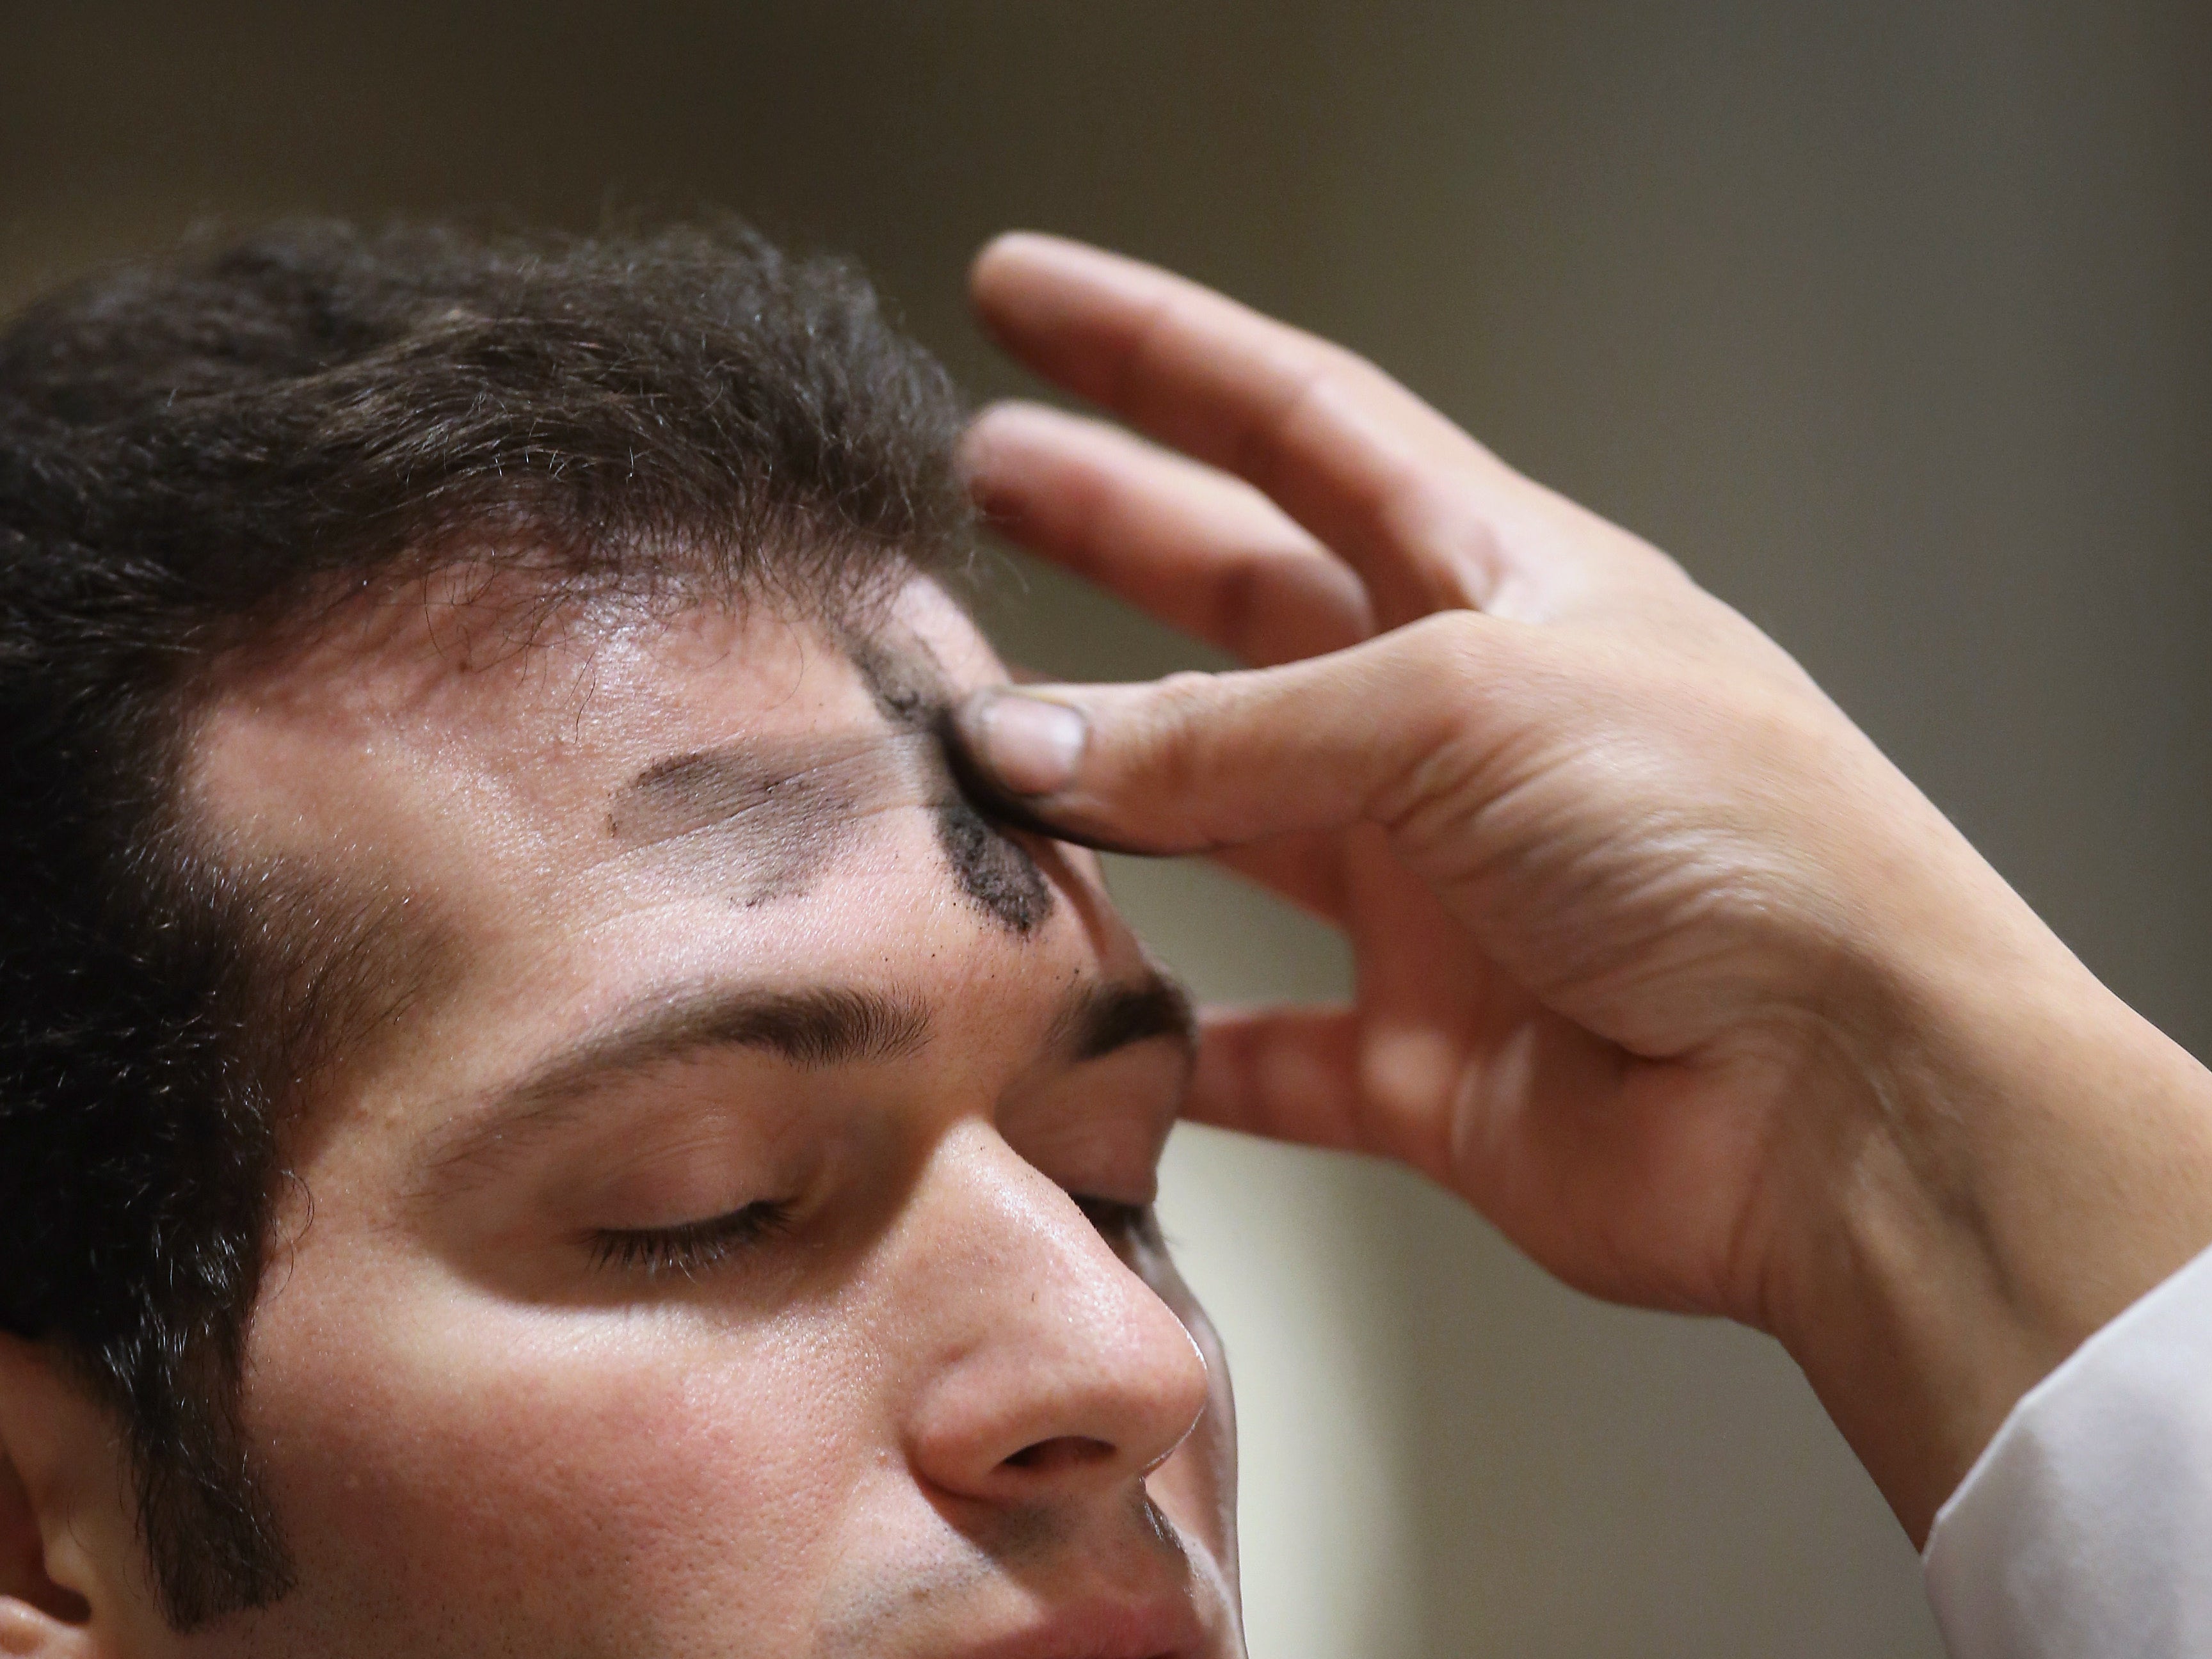 A Catholic receives ashes on his forehead while celebrating Ash Wednesday